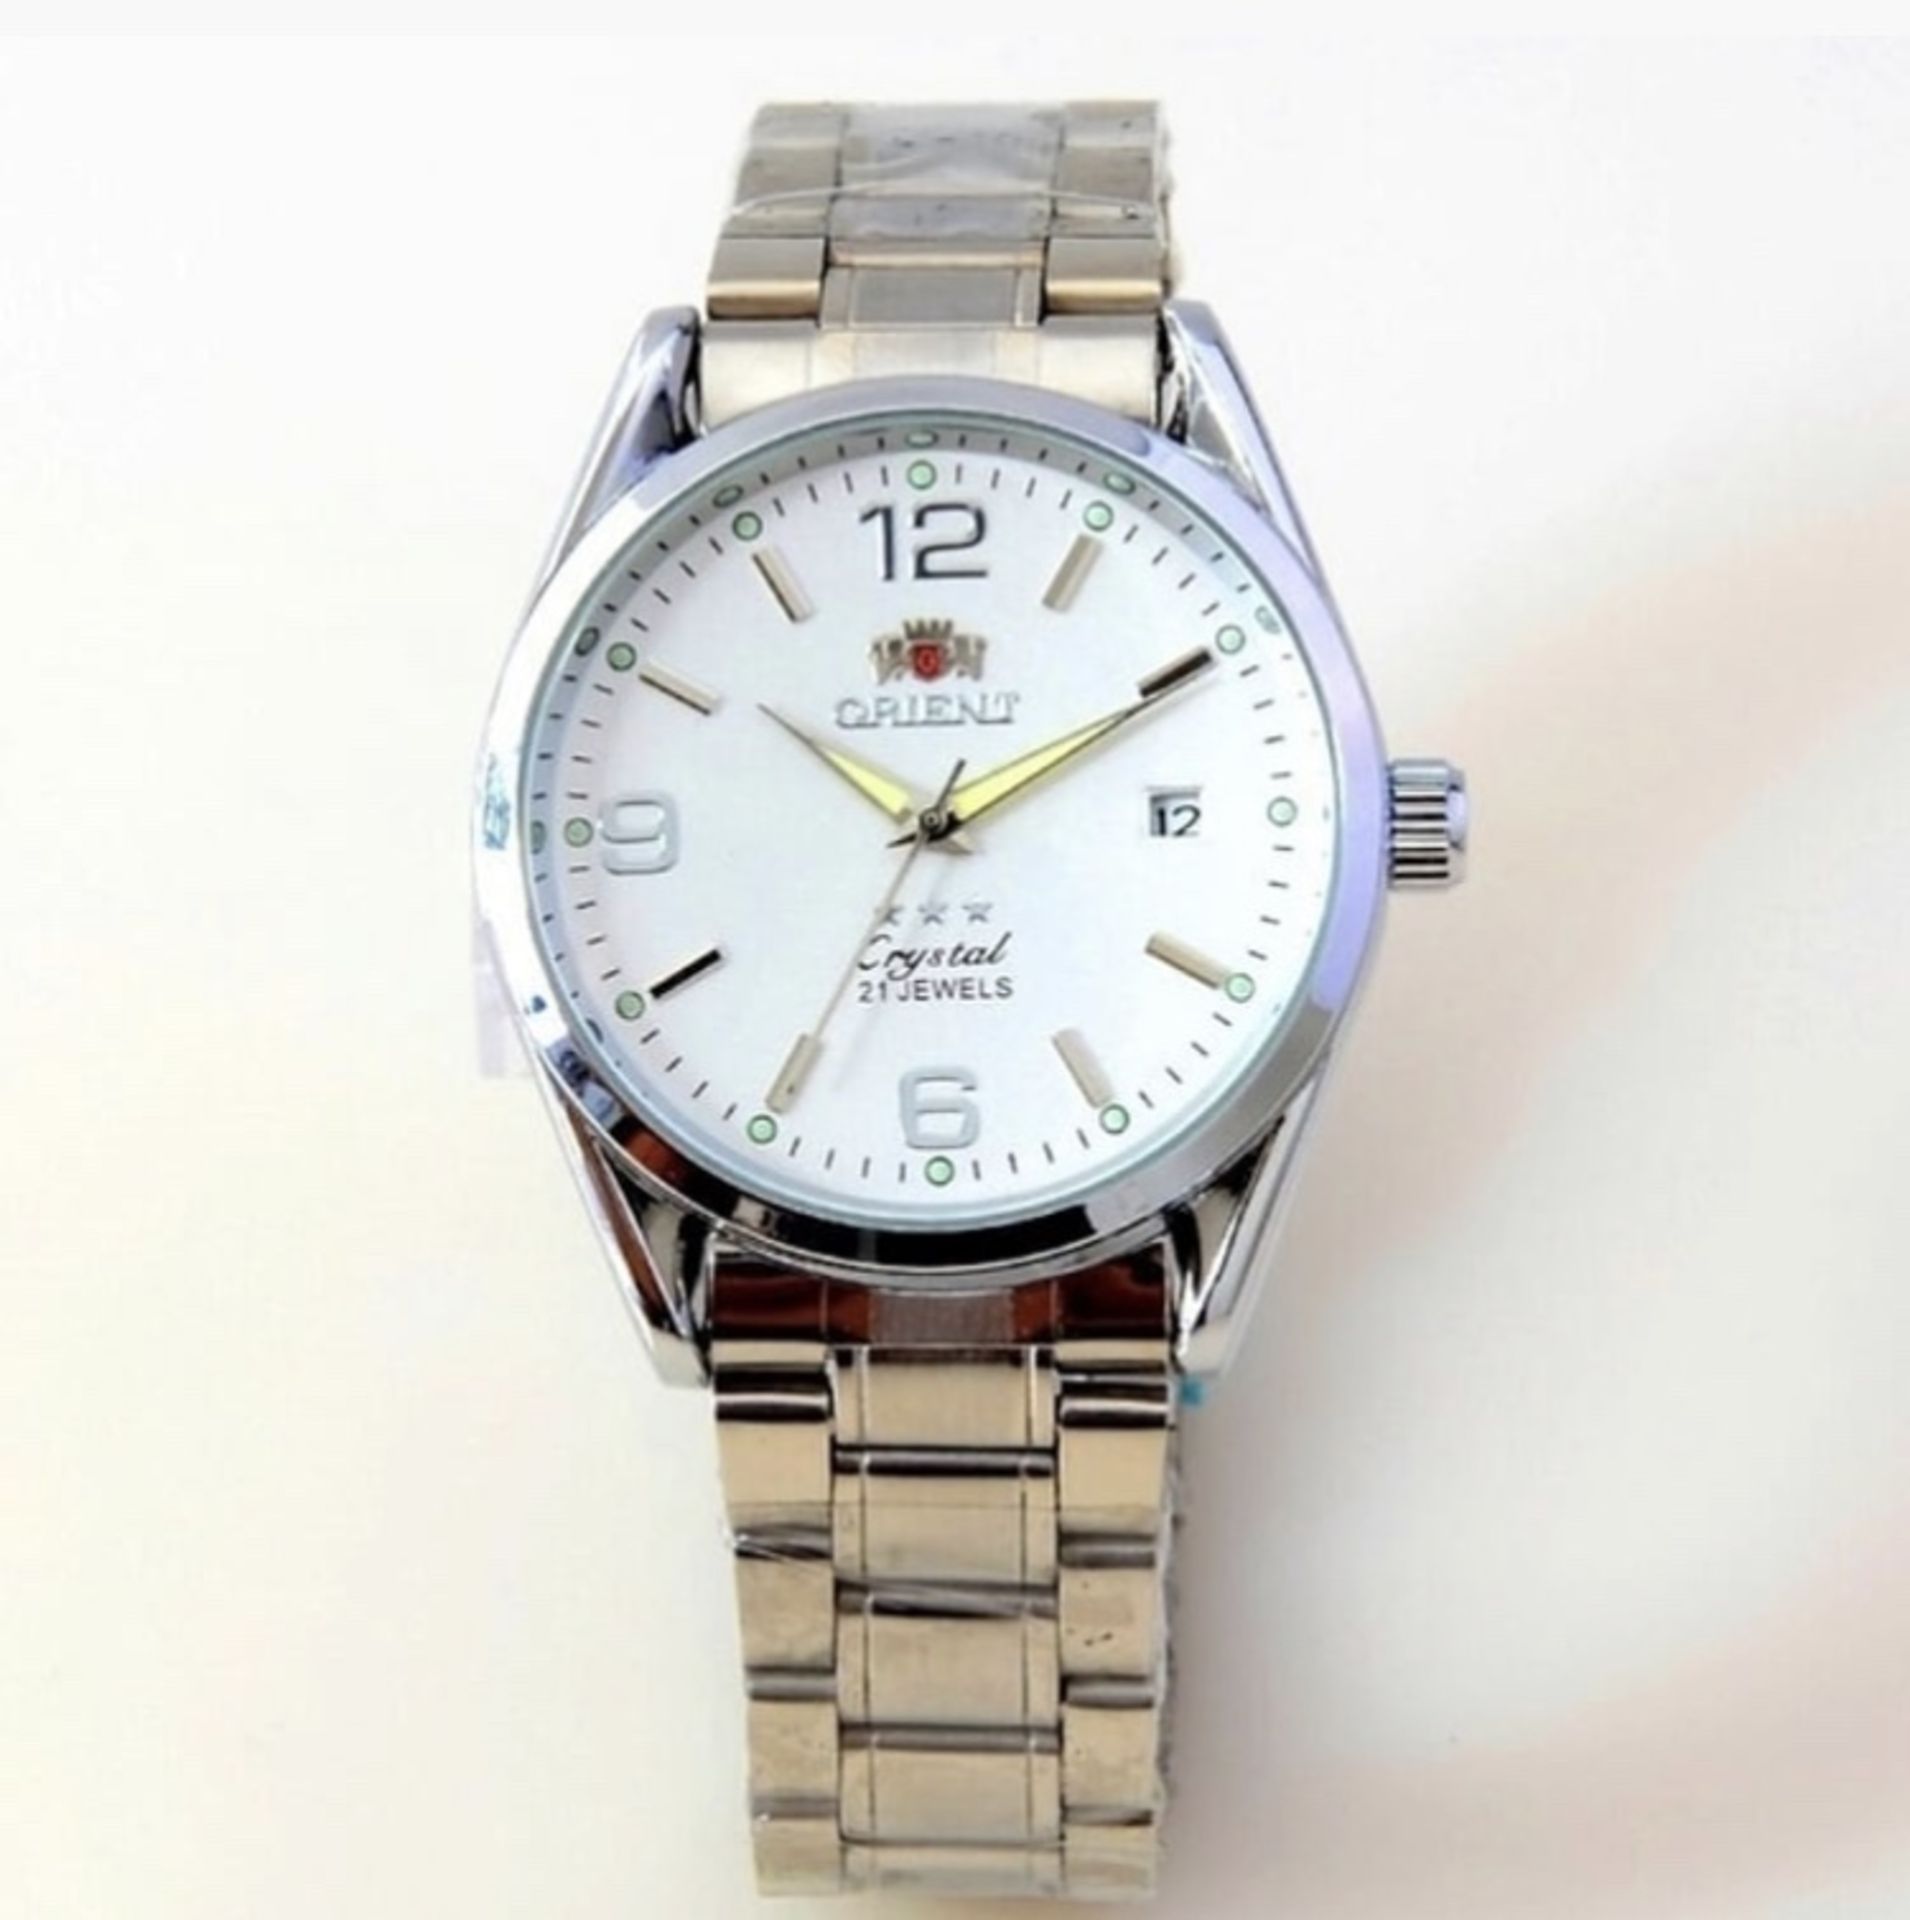 Classic Stainless Steel Mechanical Watch